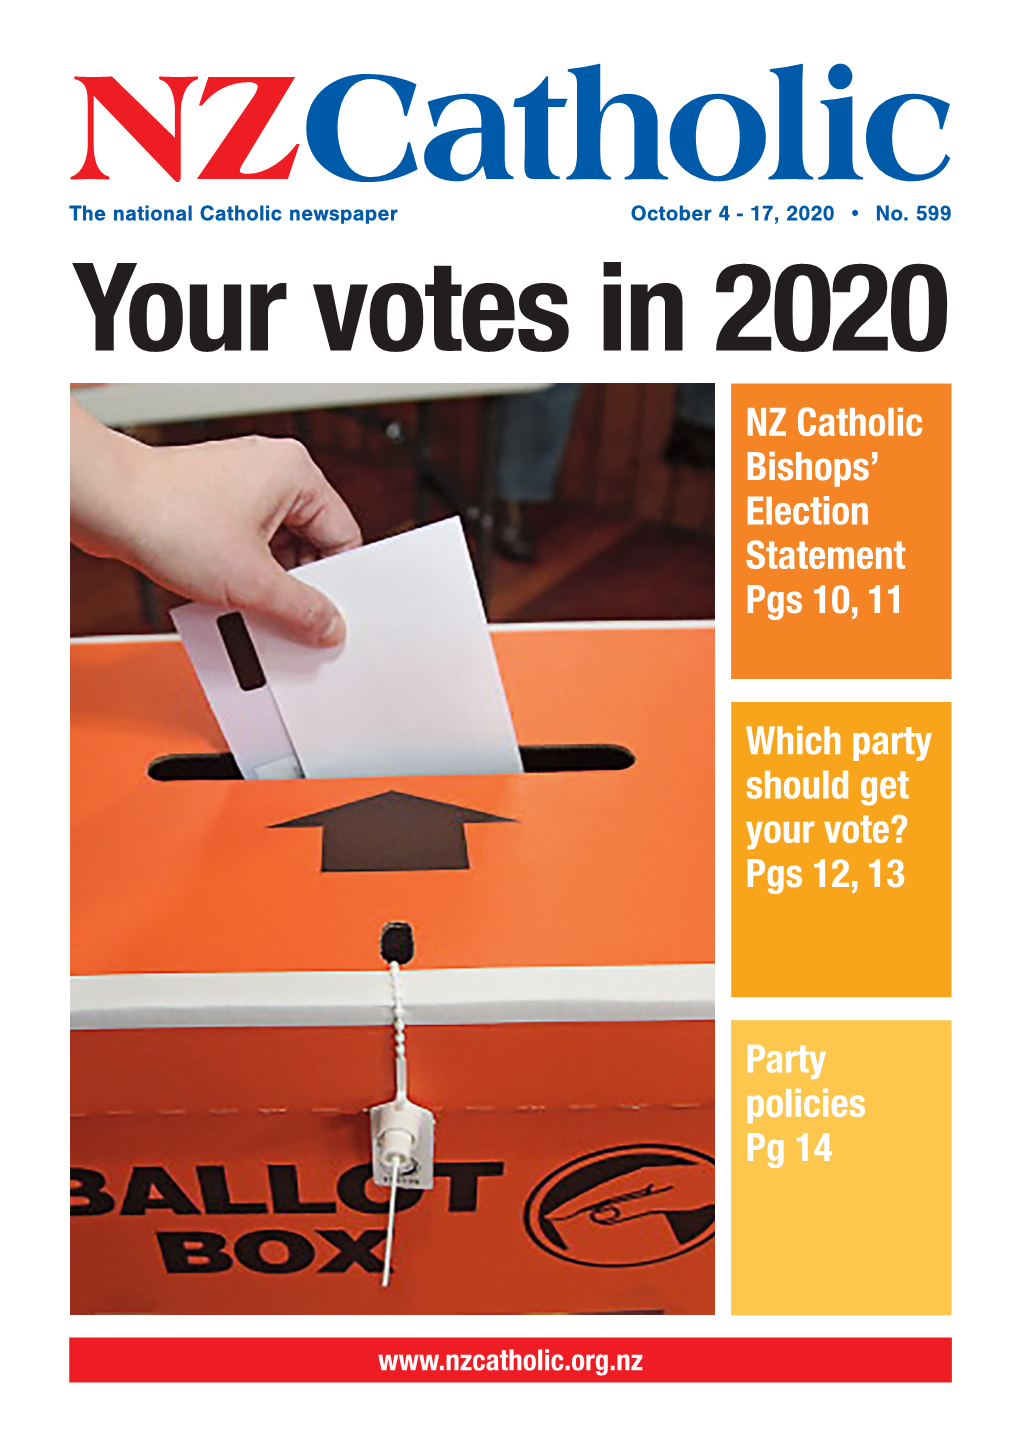 Pgs 12, 13 NZ Catholic Bishops' Election Statement Pgs 10, 11 Party